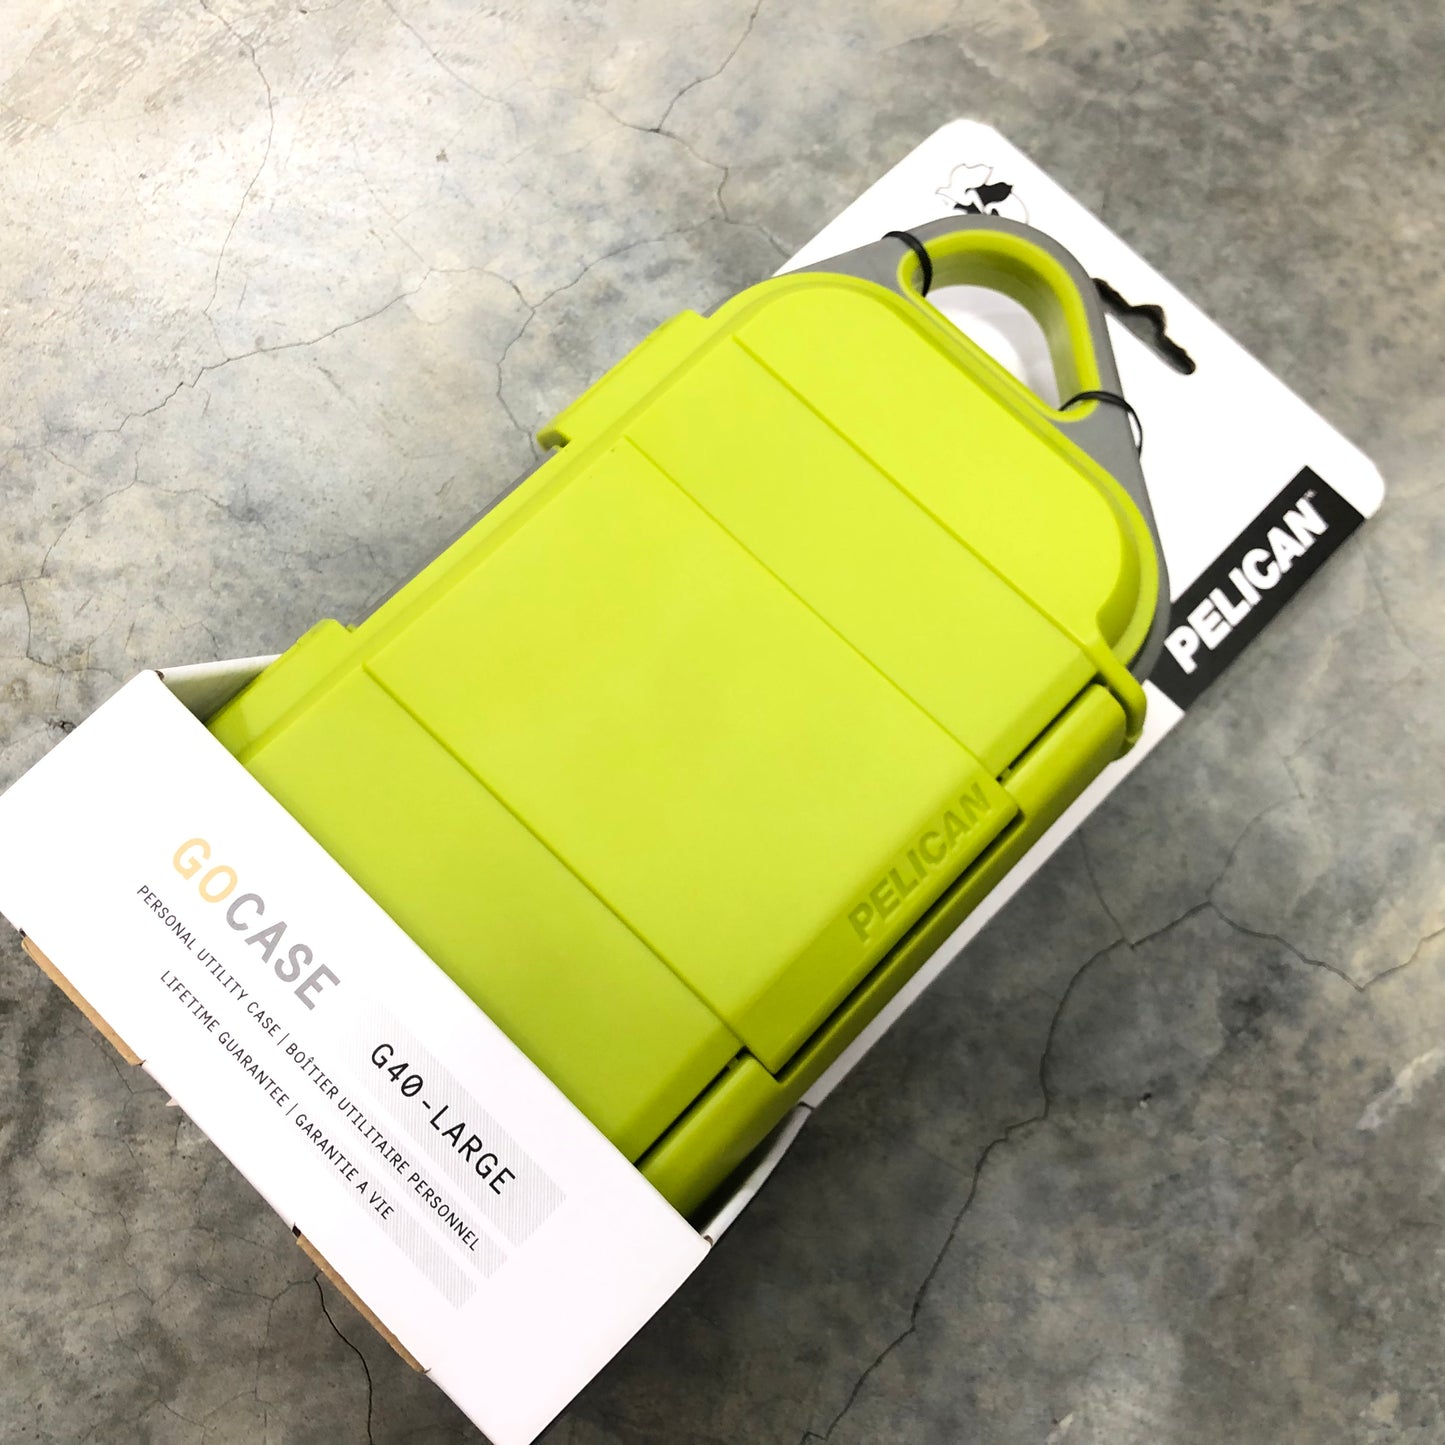 G40 Personal Utility Go Case